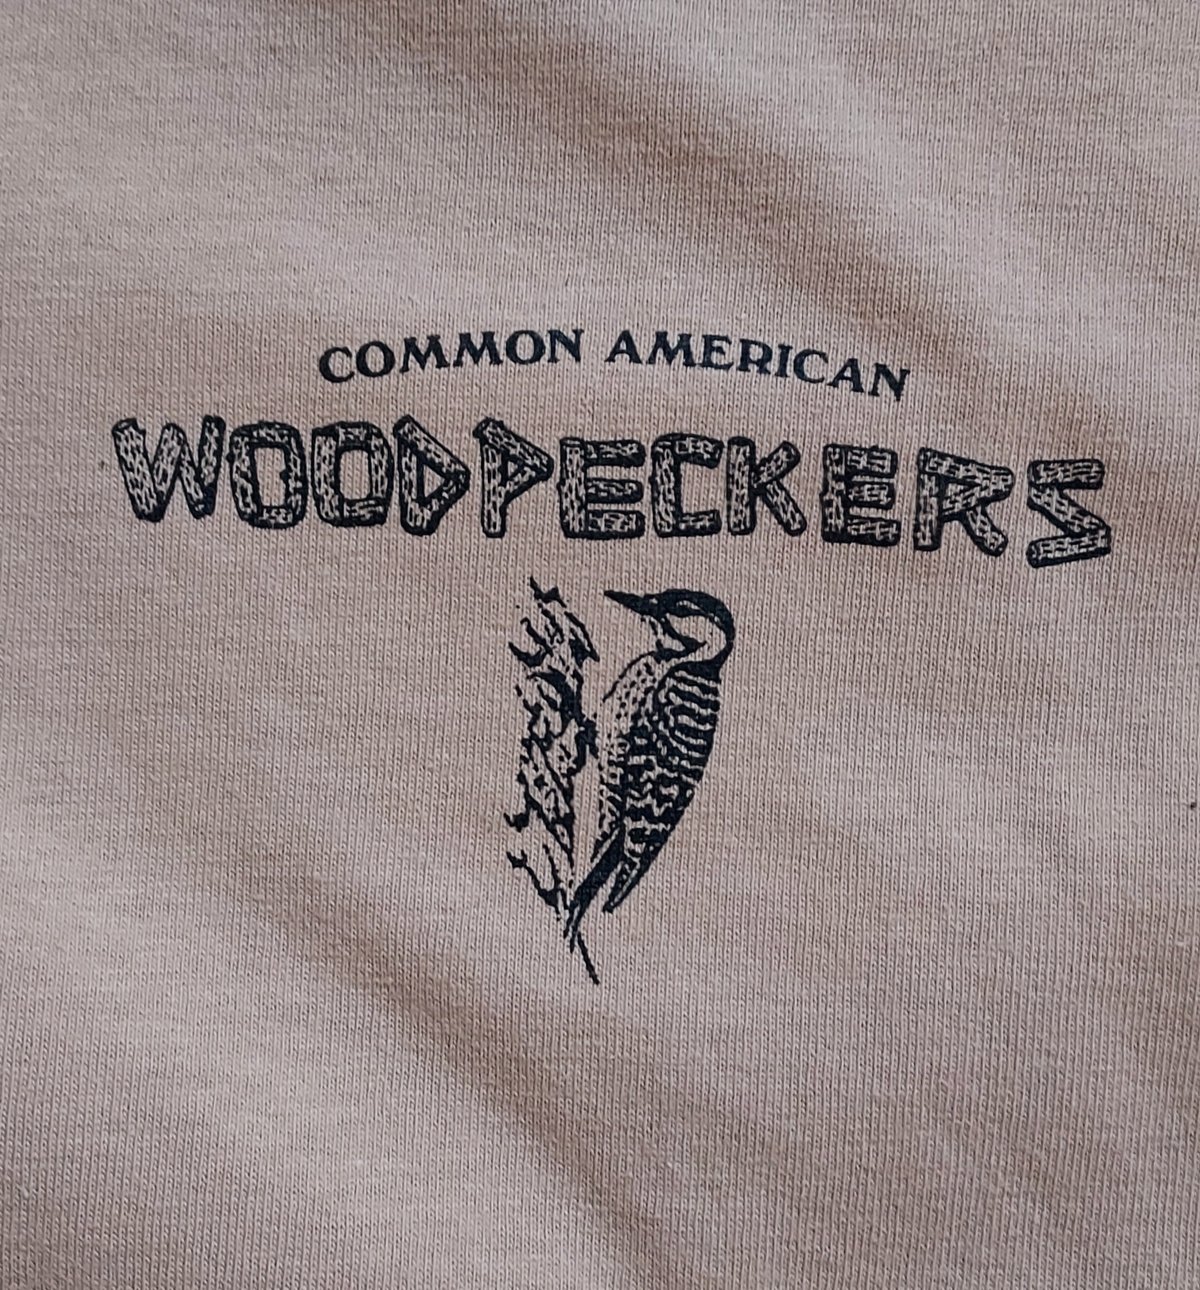 Image of Common American Woodpeckers 